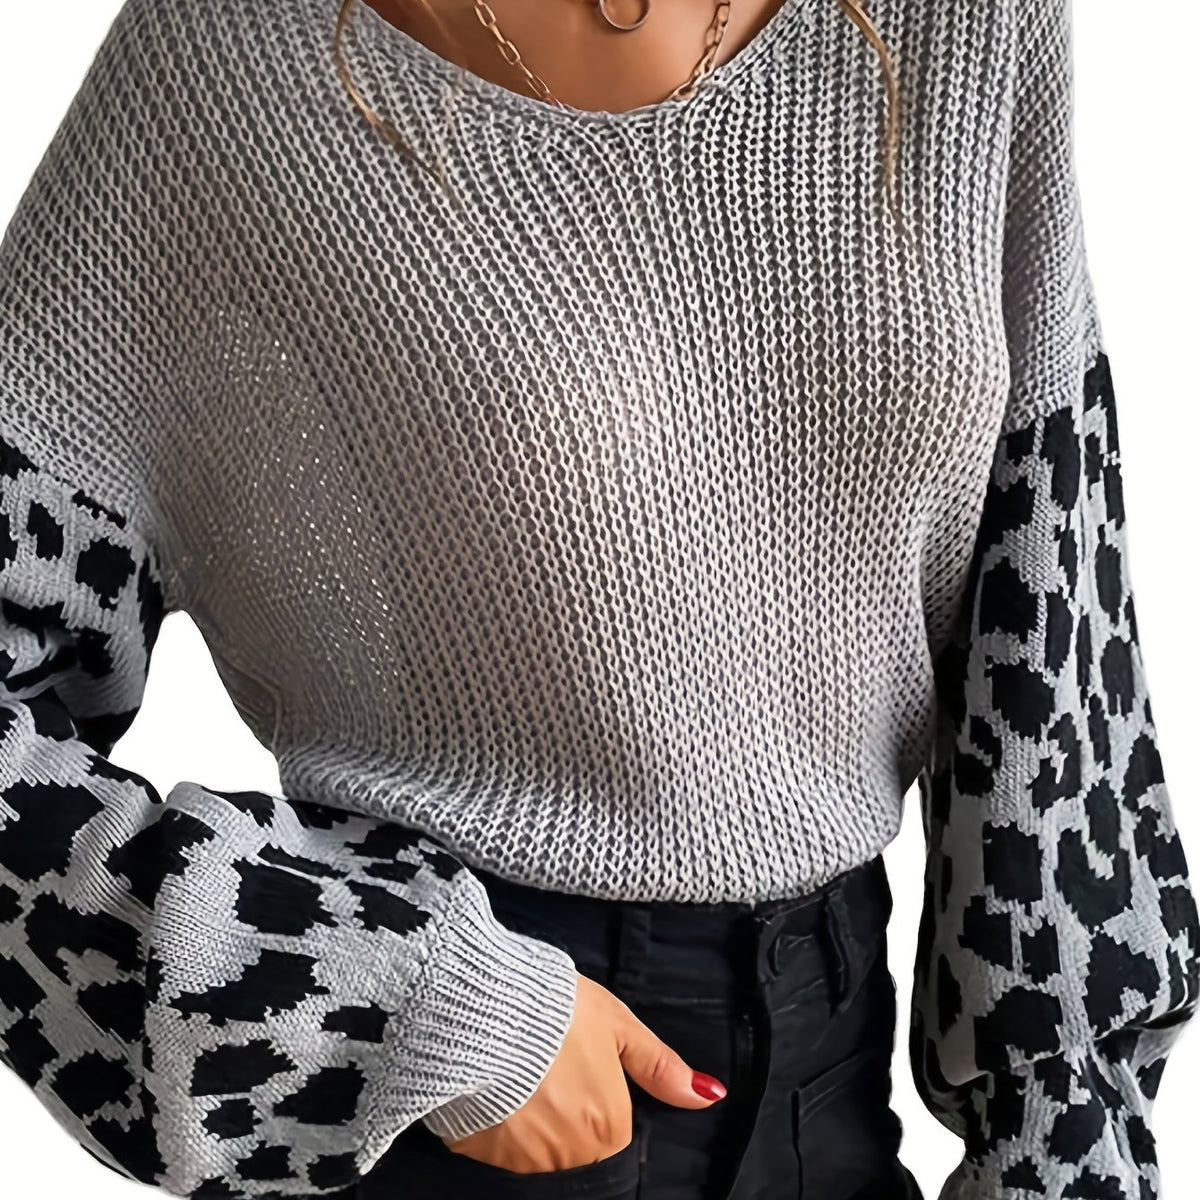 vlovelaw  Contrast Leopard V Neck Loose Sweater, Casual Long Sleeve Sweater For Spring & Fall, Women's Clothing